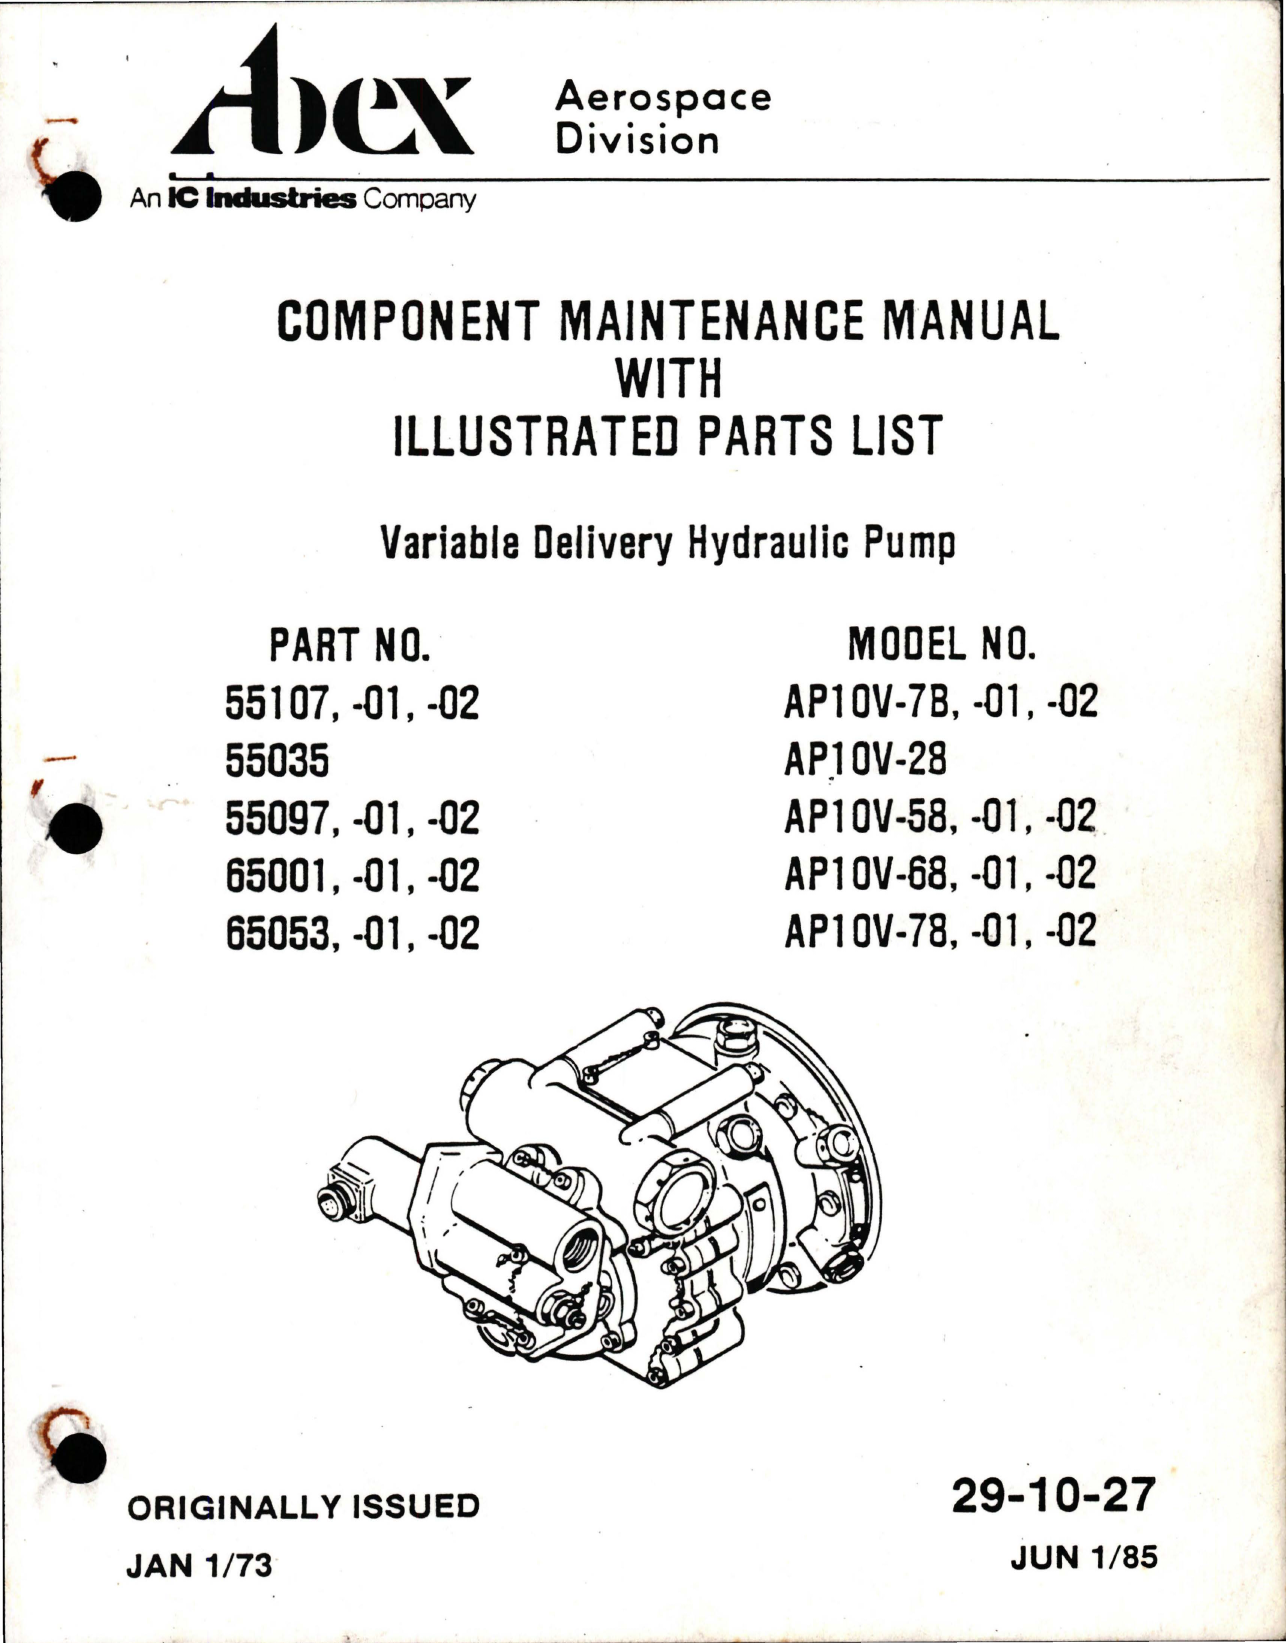 Sample page 1 from AirCorps Library document: Maintenance Manual with Illustrated Parts List for Variable Delivery Hydraulic Pump